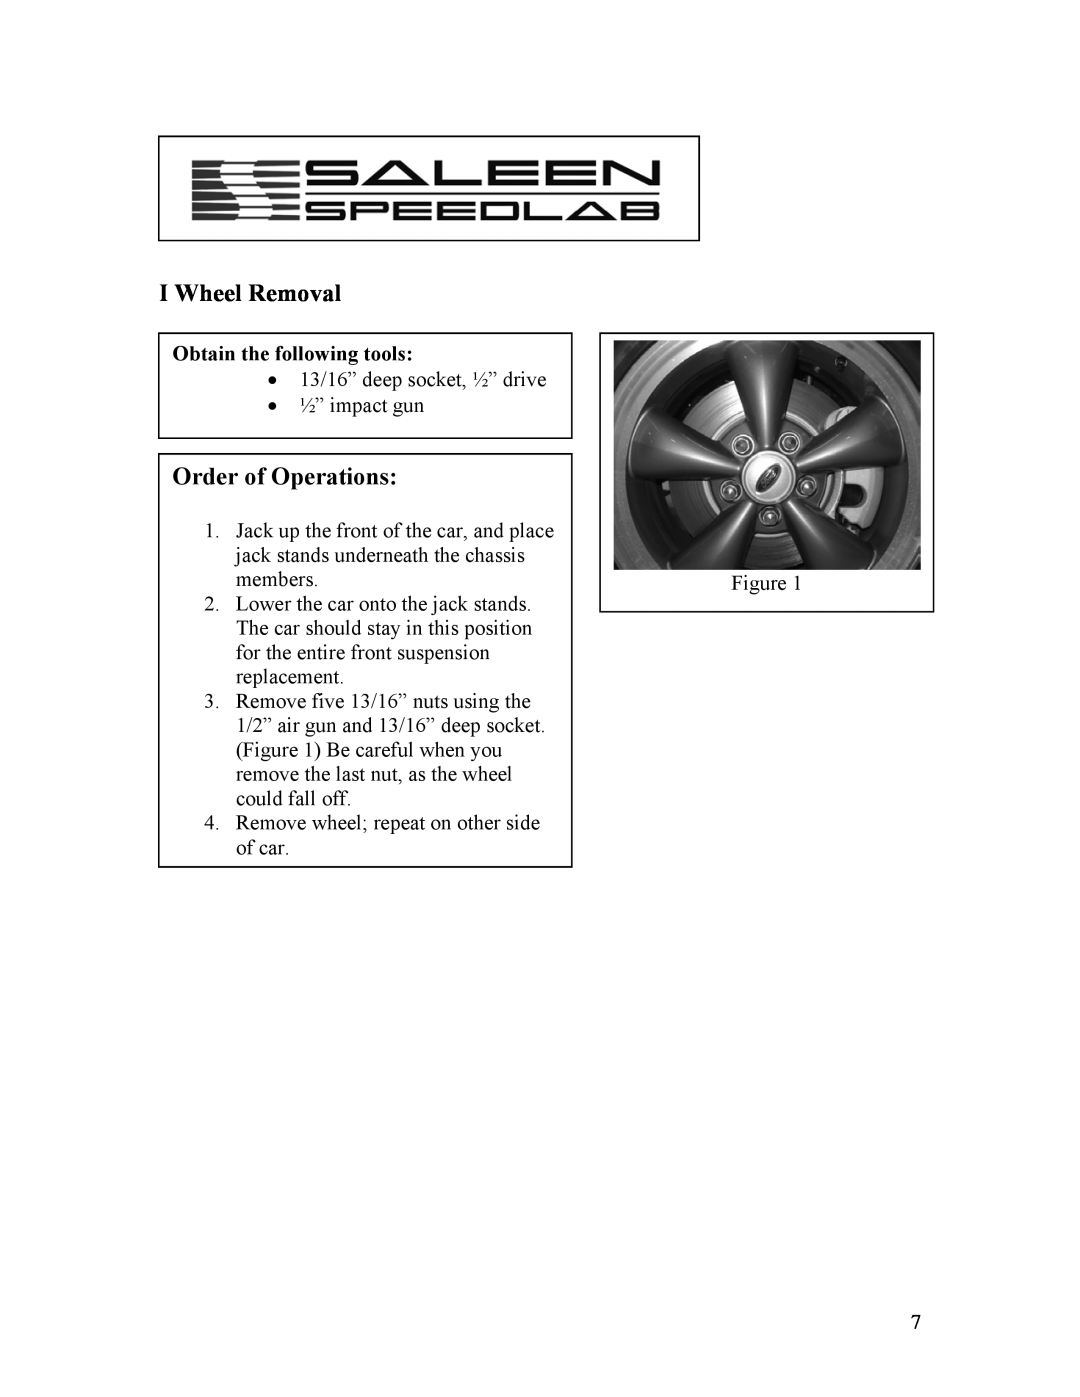 Saleen 10-8002-C11790A installation manual I Wheel Removal, Order of Operations, Obtain the following tools 